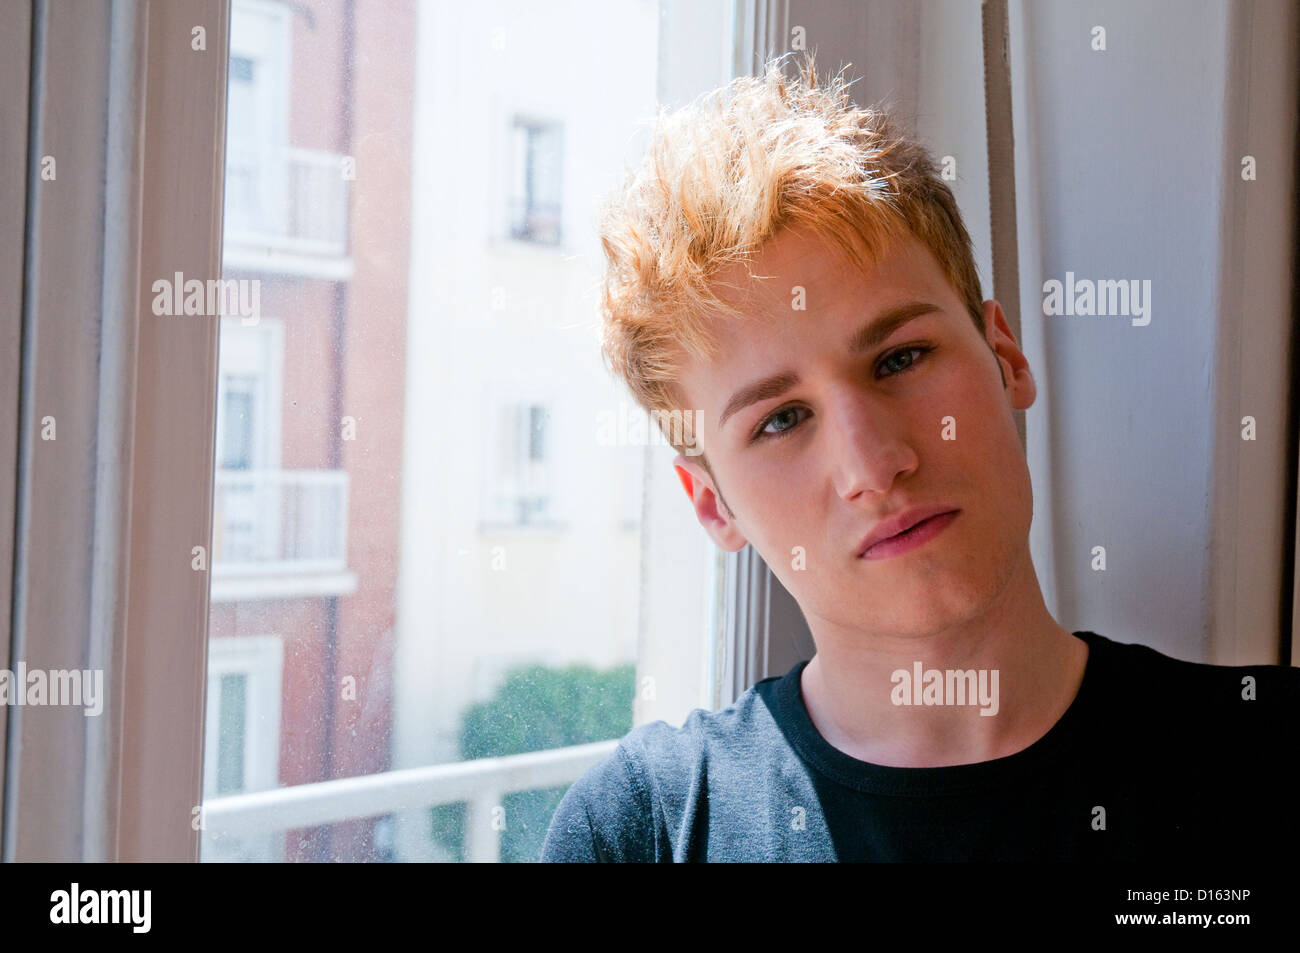 Portrait of young man by a window, looking at the camera. Stock Photo